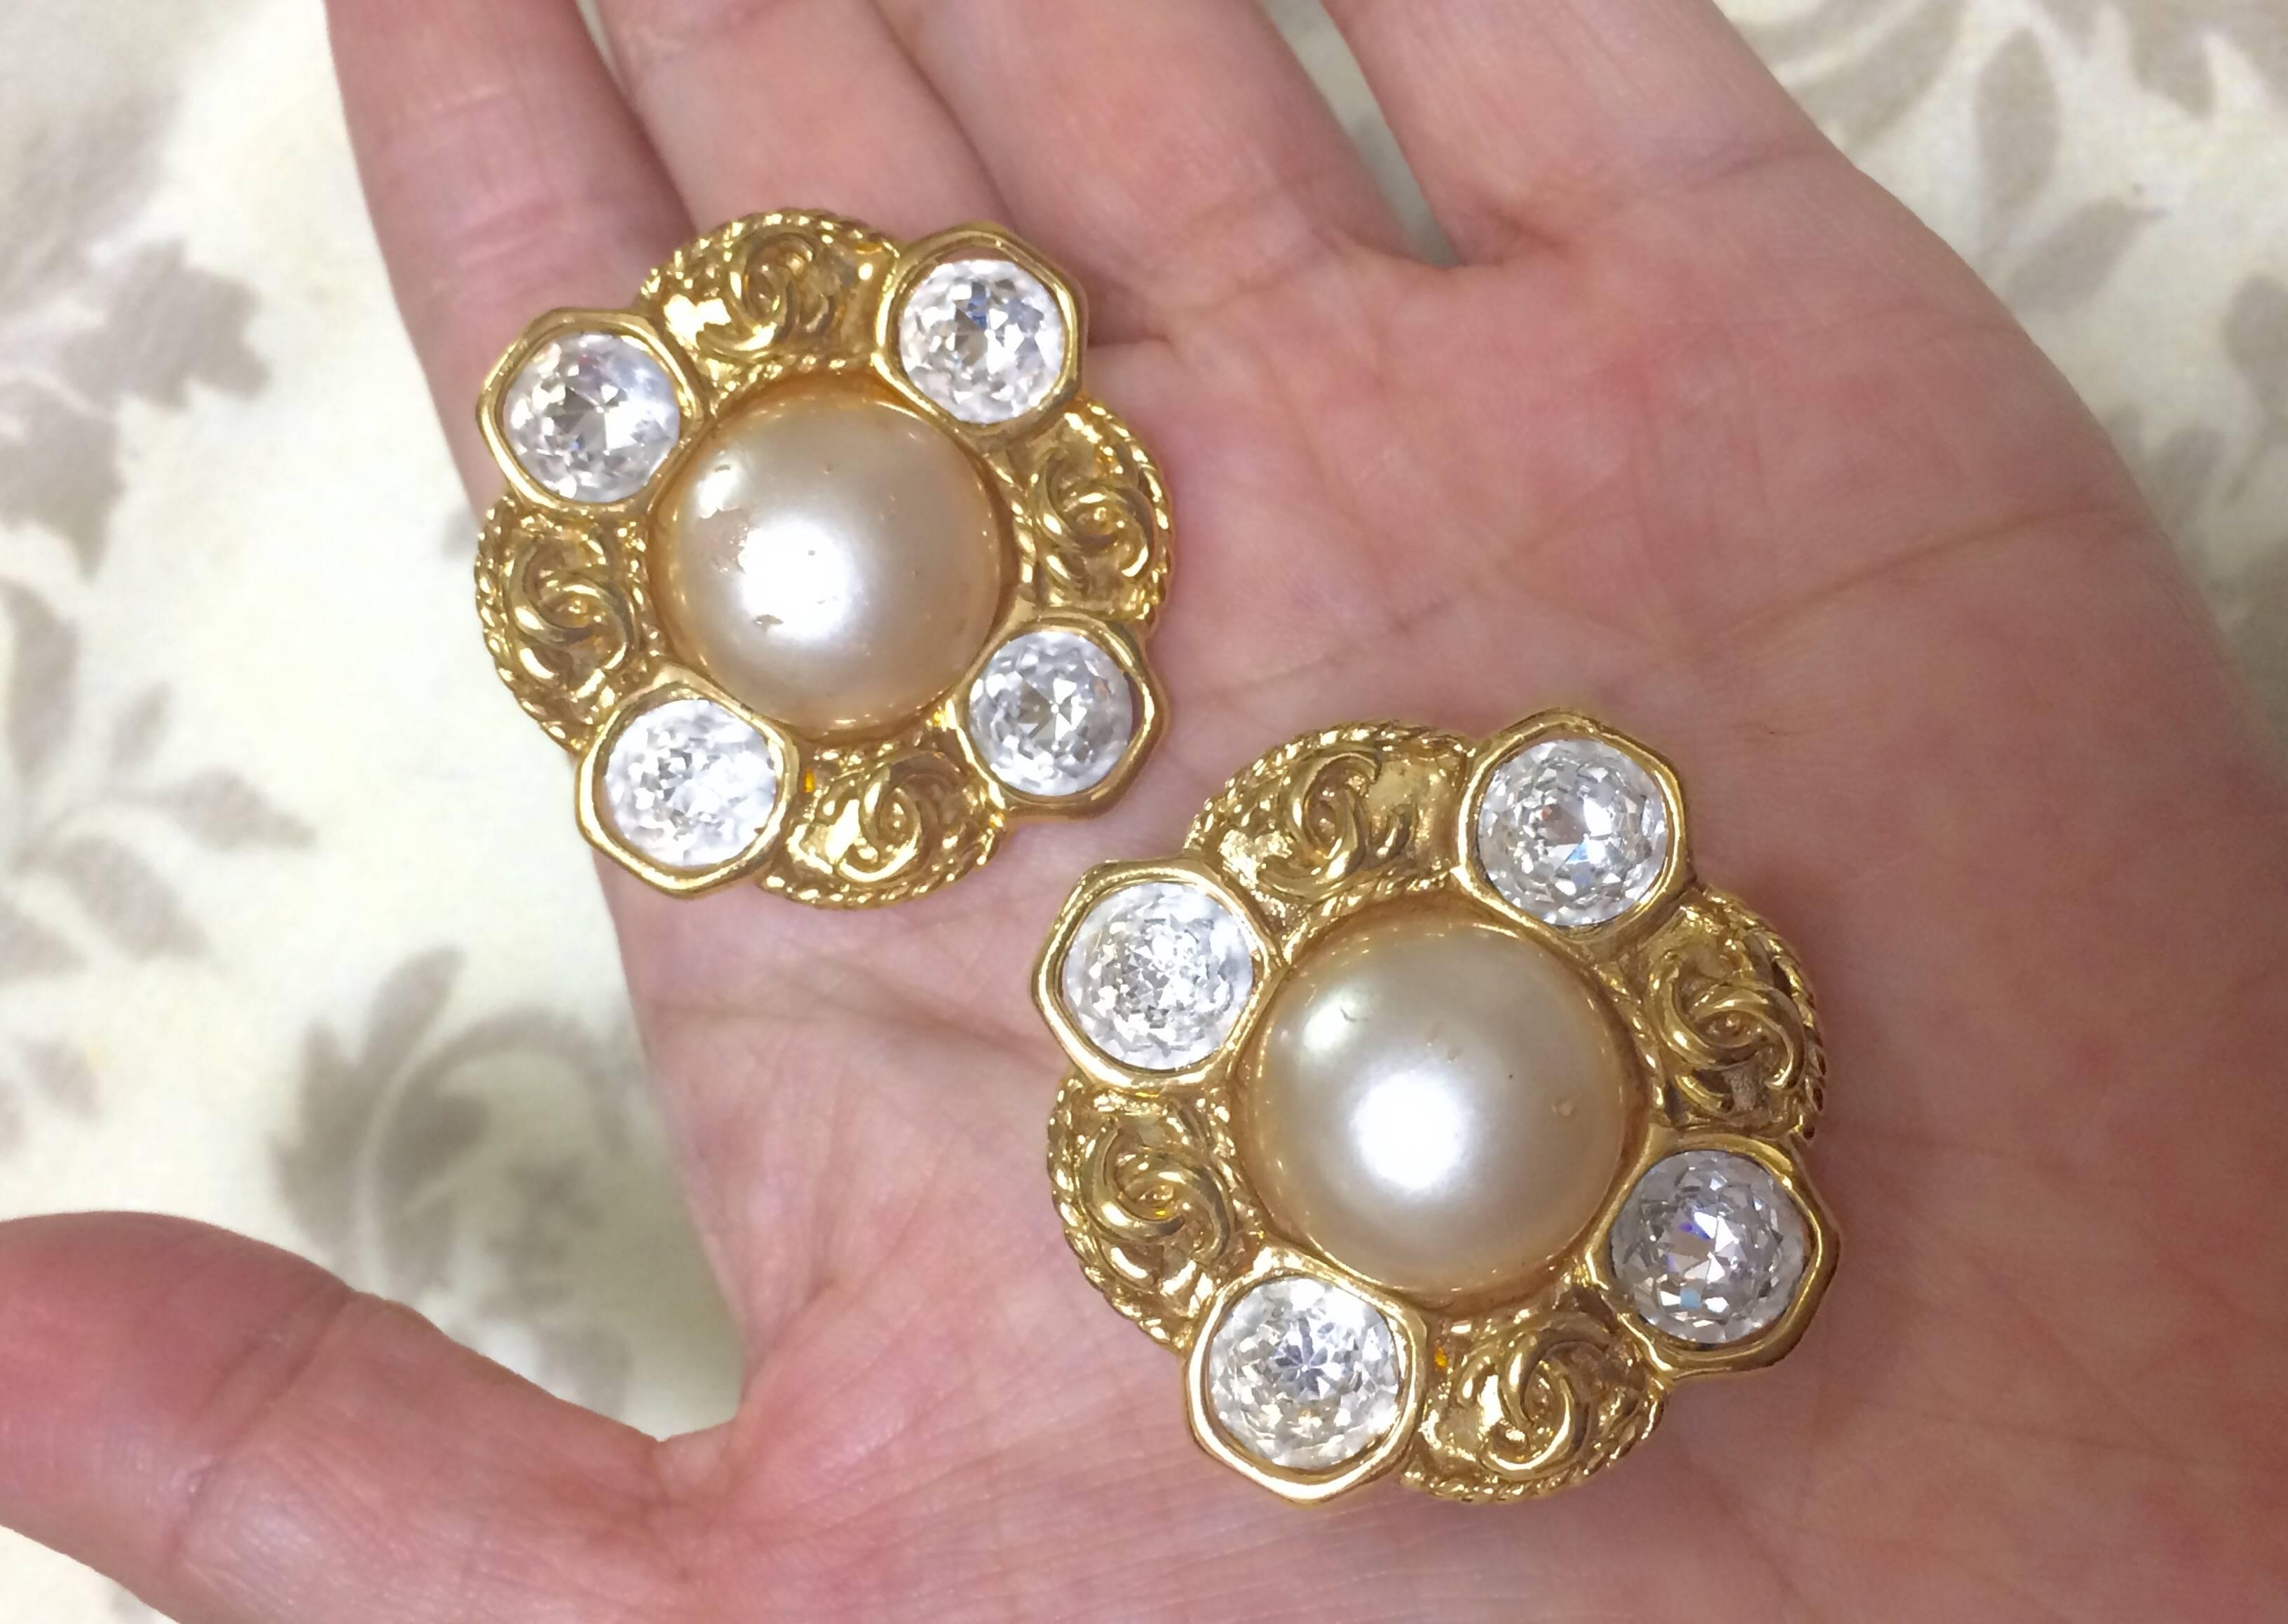 Vintage CHANEL gold tone earrings with a faux pearl, Swarovski crystal stones For Sale 3